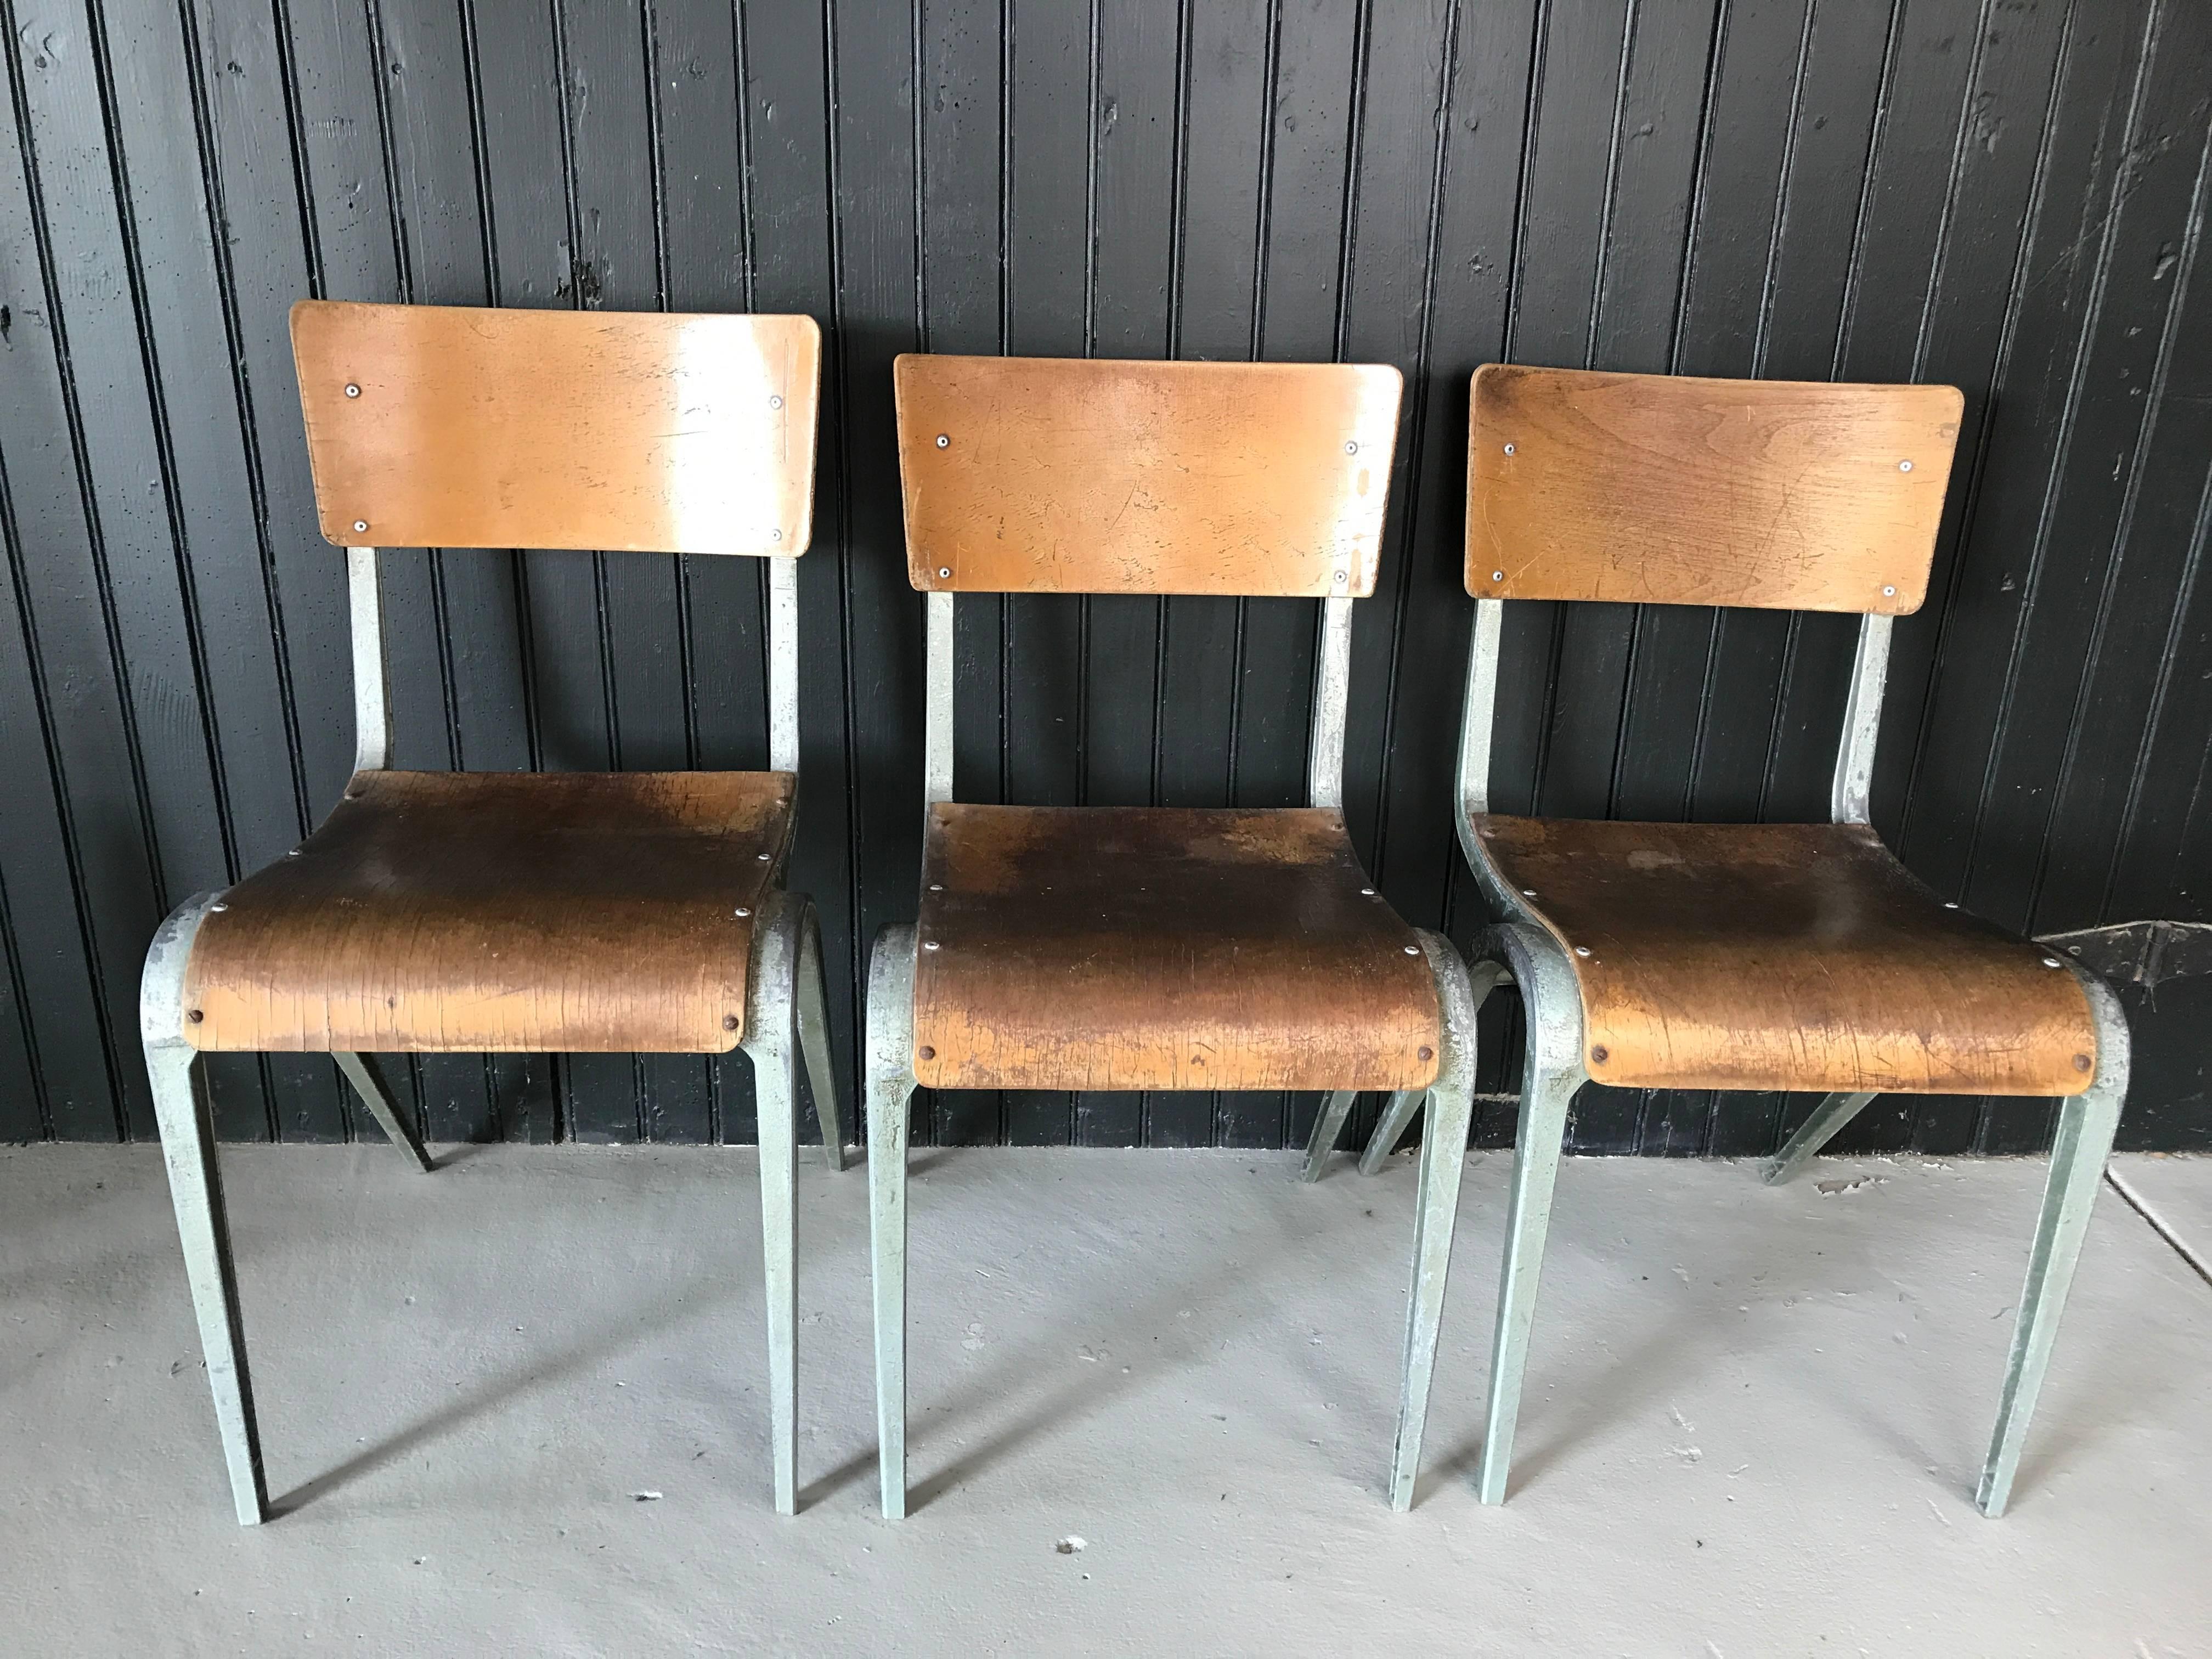 A set of three Industrial stacking chairs. Metal frame with architectural curved legs and bentwood seat and backrest. All show original patina consistent with age and use. Sold individually. One has a slightly higher profile.